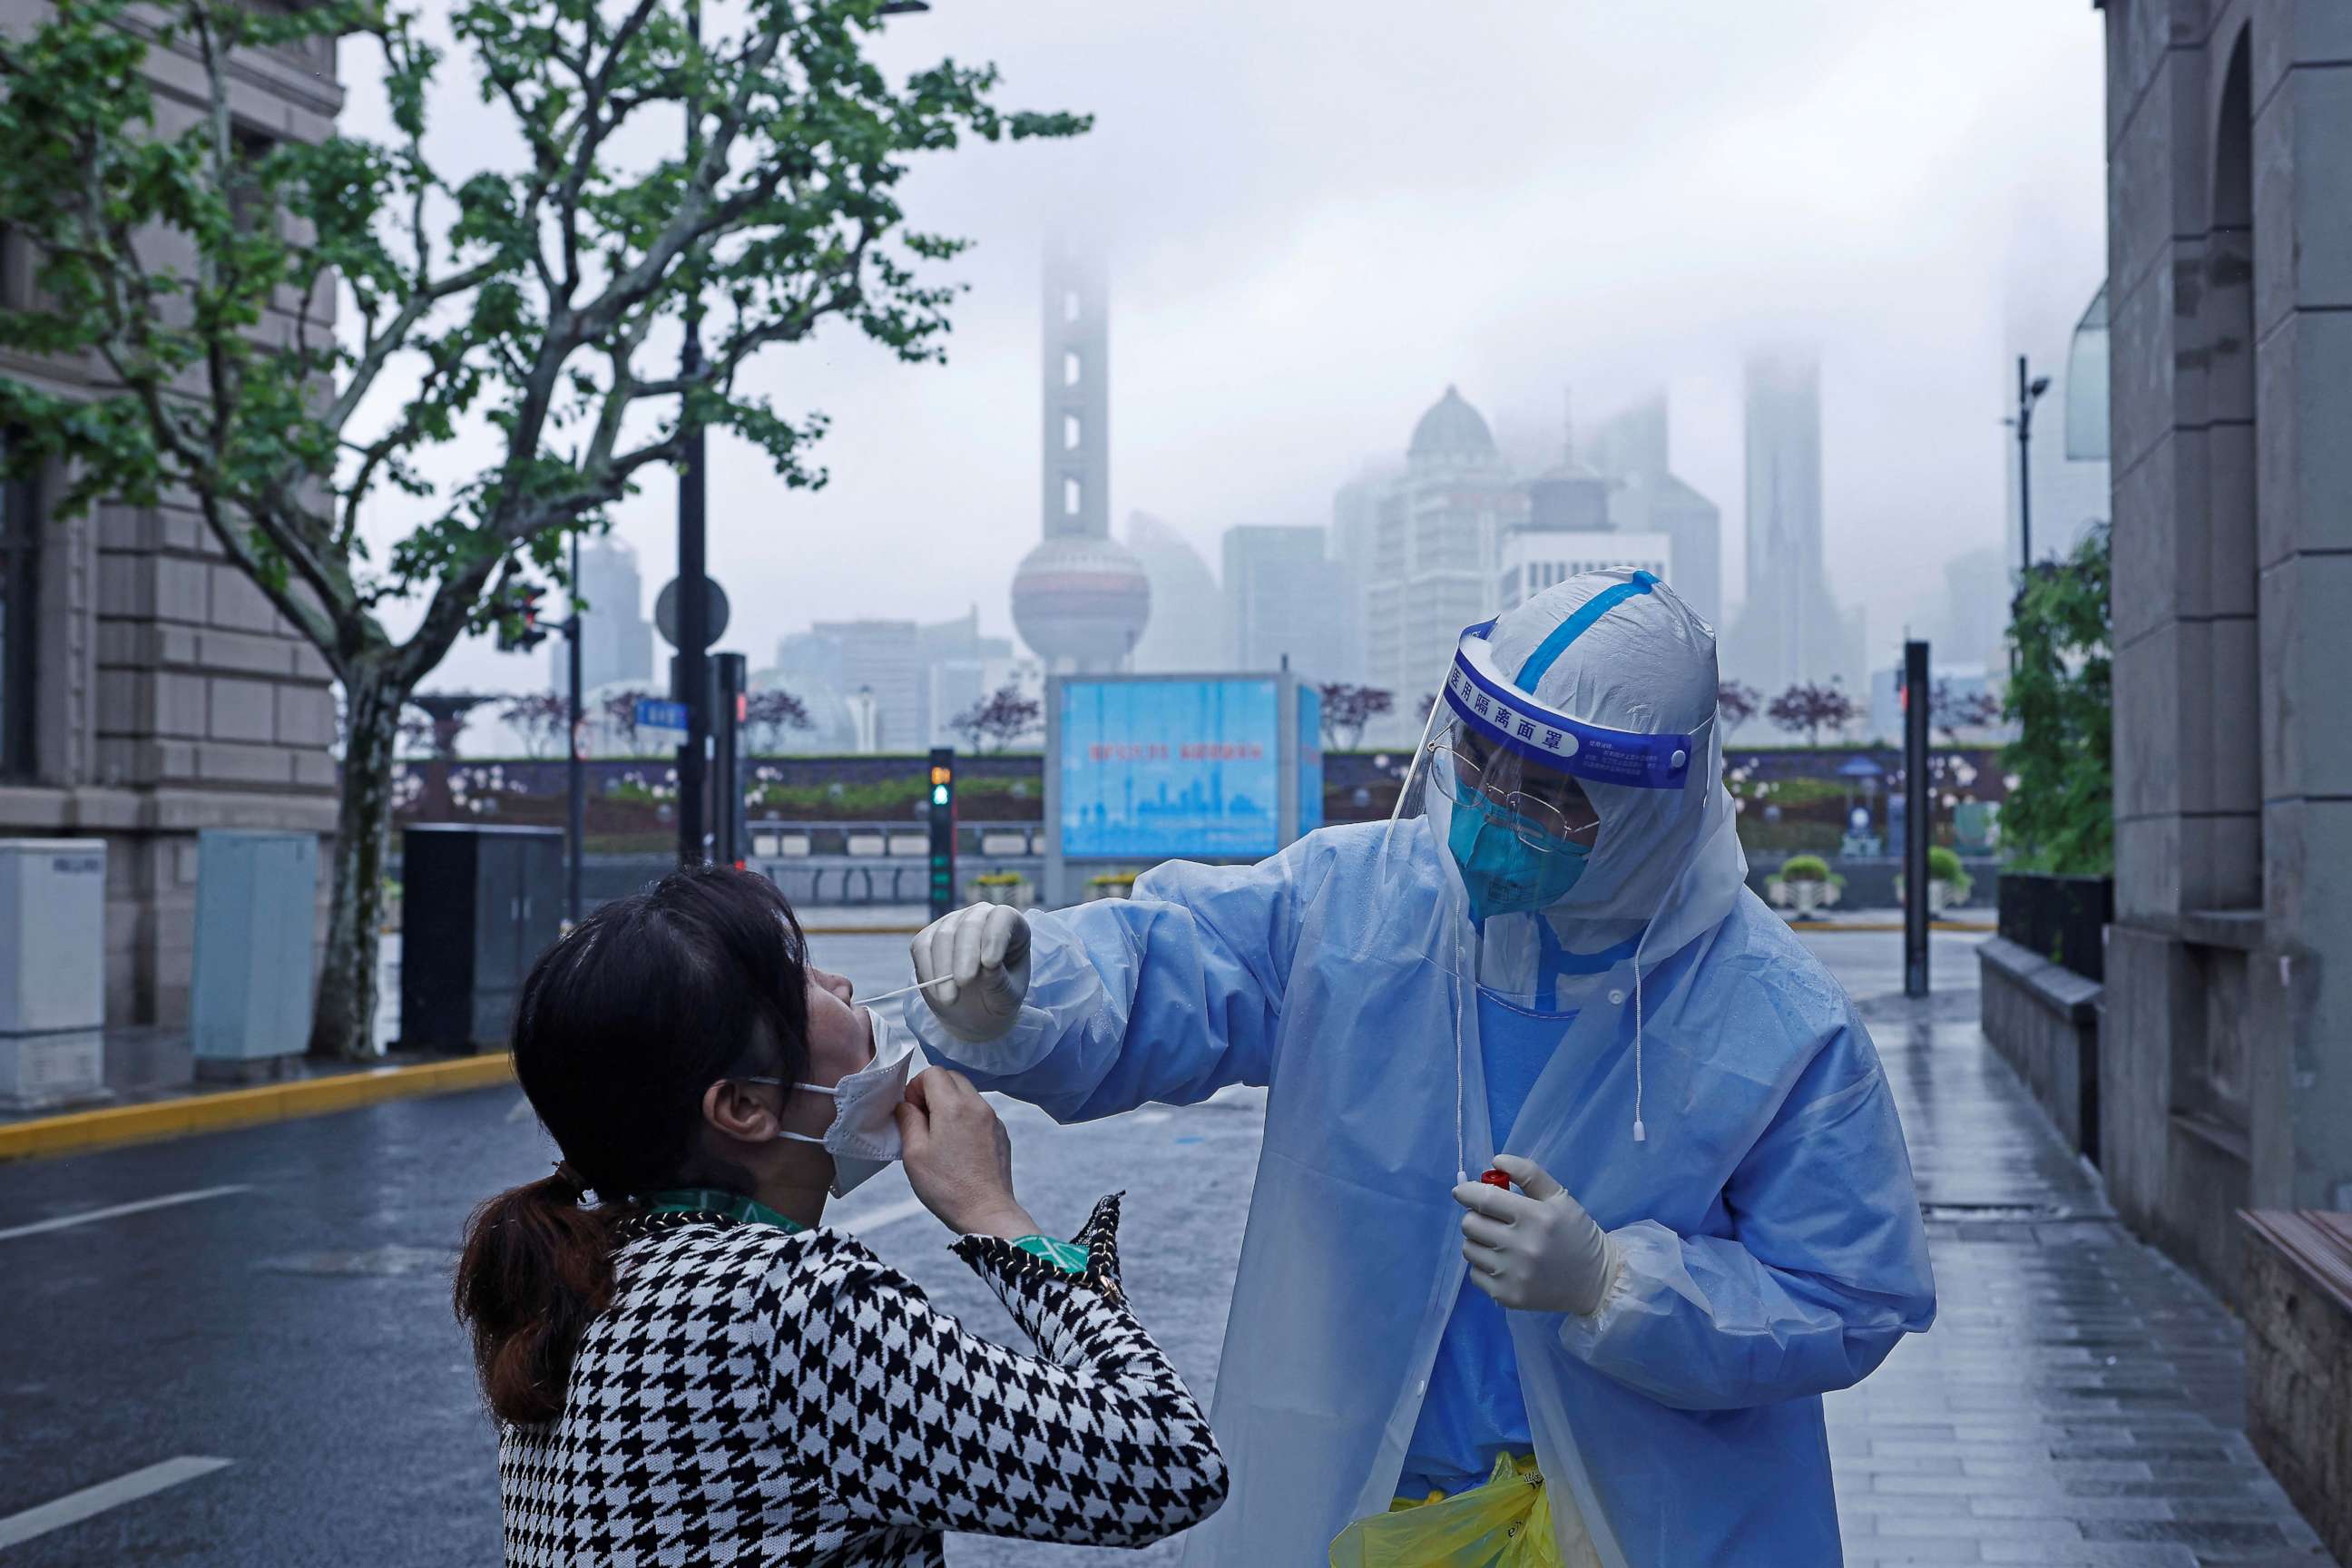 PHOTO: A medical worker in protective gear collects a swab sample from a resident for nucleic acid testing, amid the COVID-19 outbreak, in Shanghai, China, April 26, 2022.